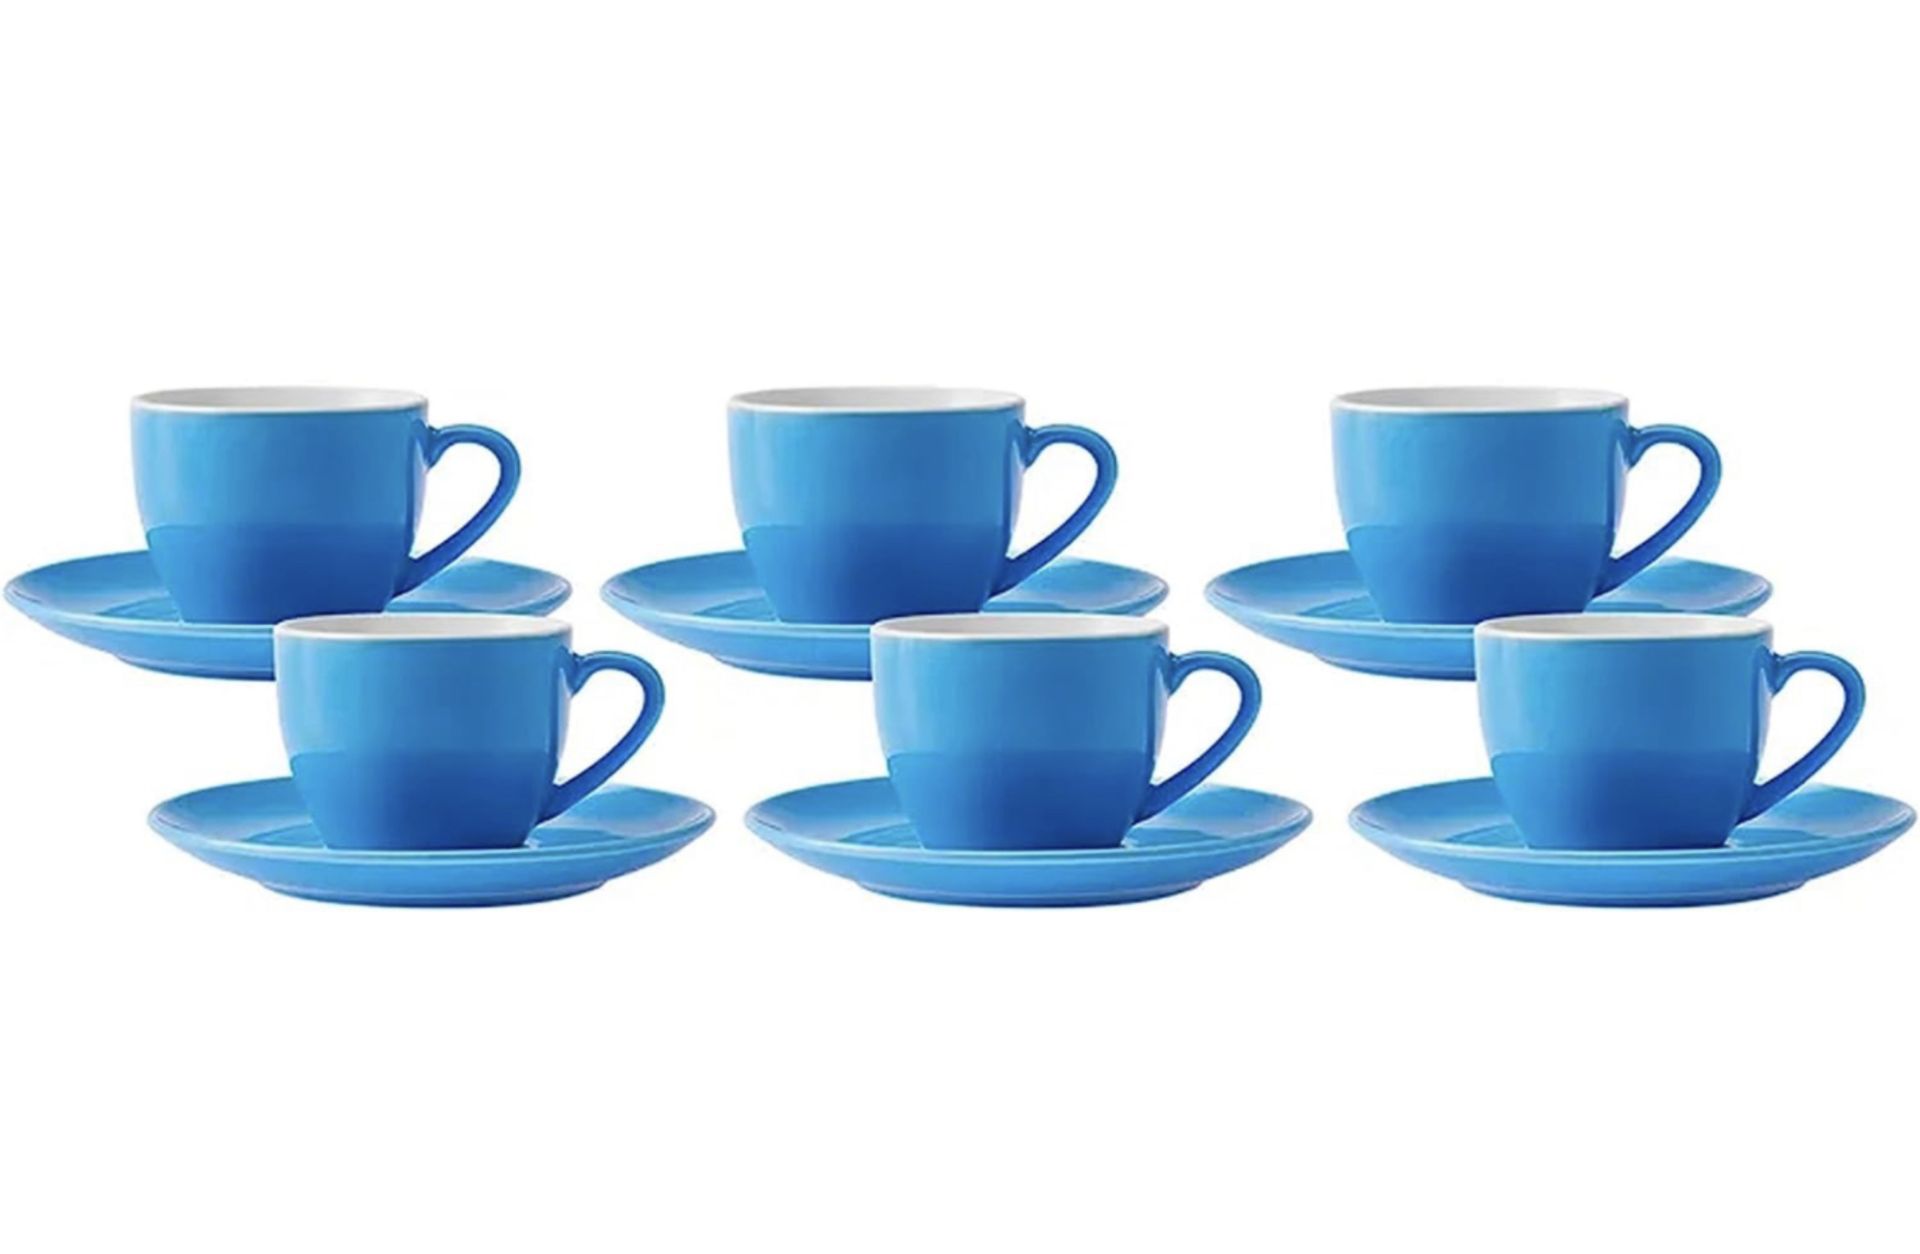 KARACA Sky Espresso Cups for 6 People, 80 ml, Sky, 6 x Espresso Cups and 6 x Saucers, Robust Mocha - Image 3 of 3